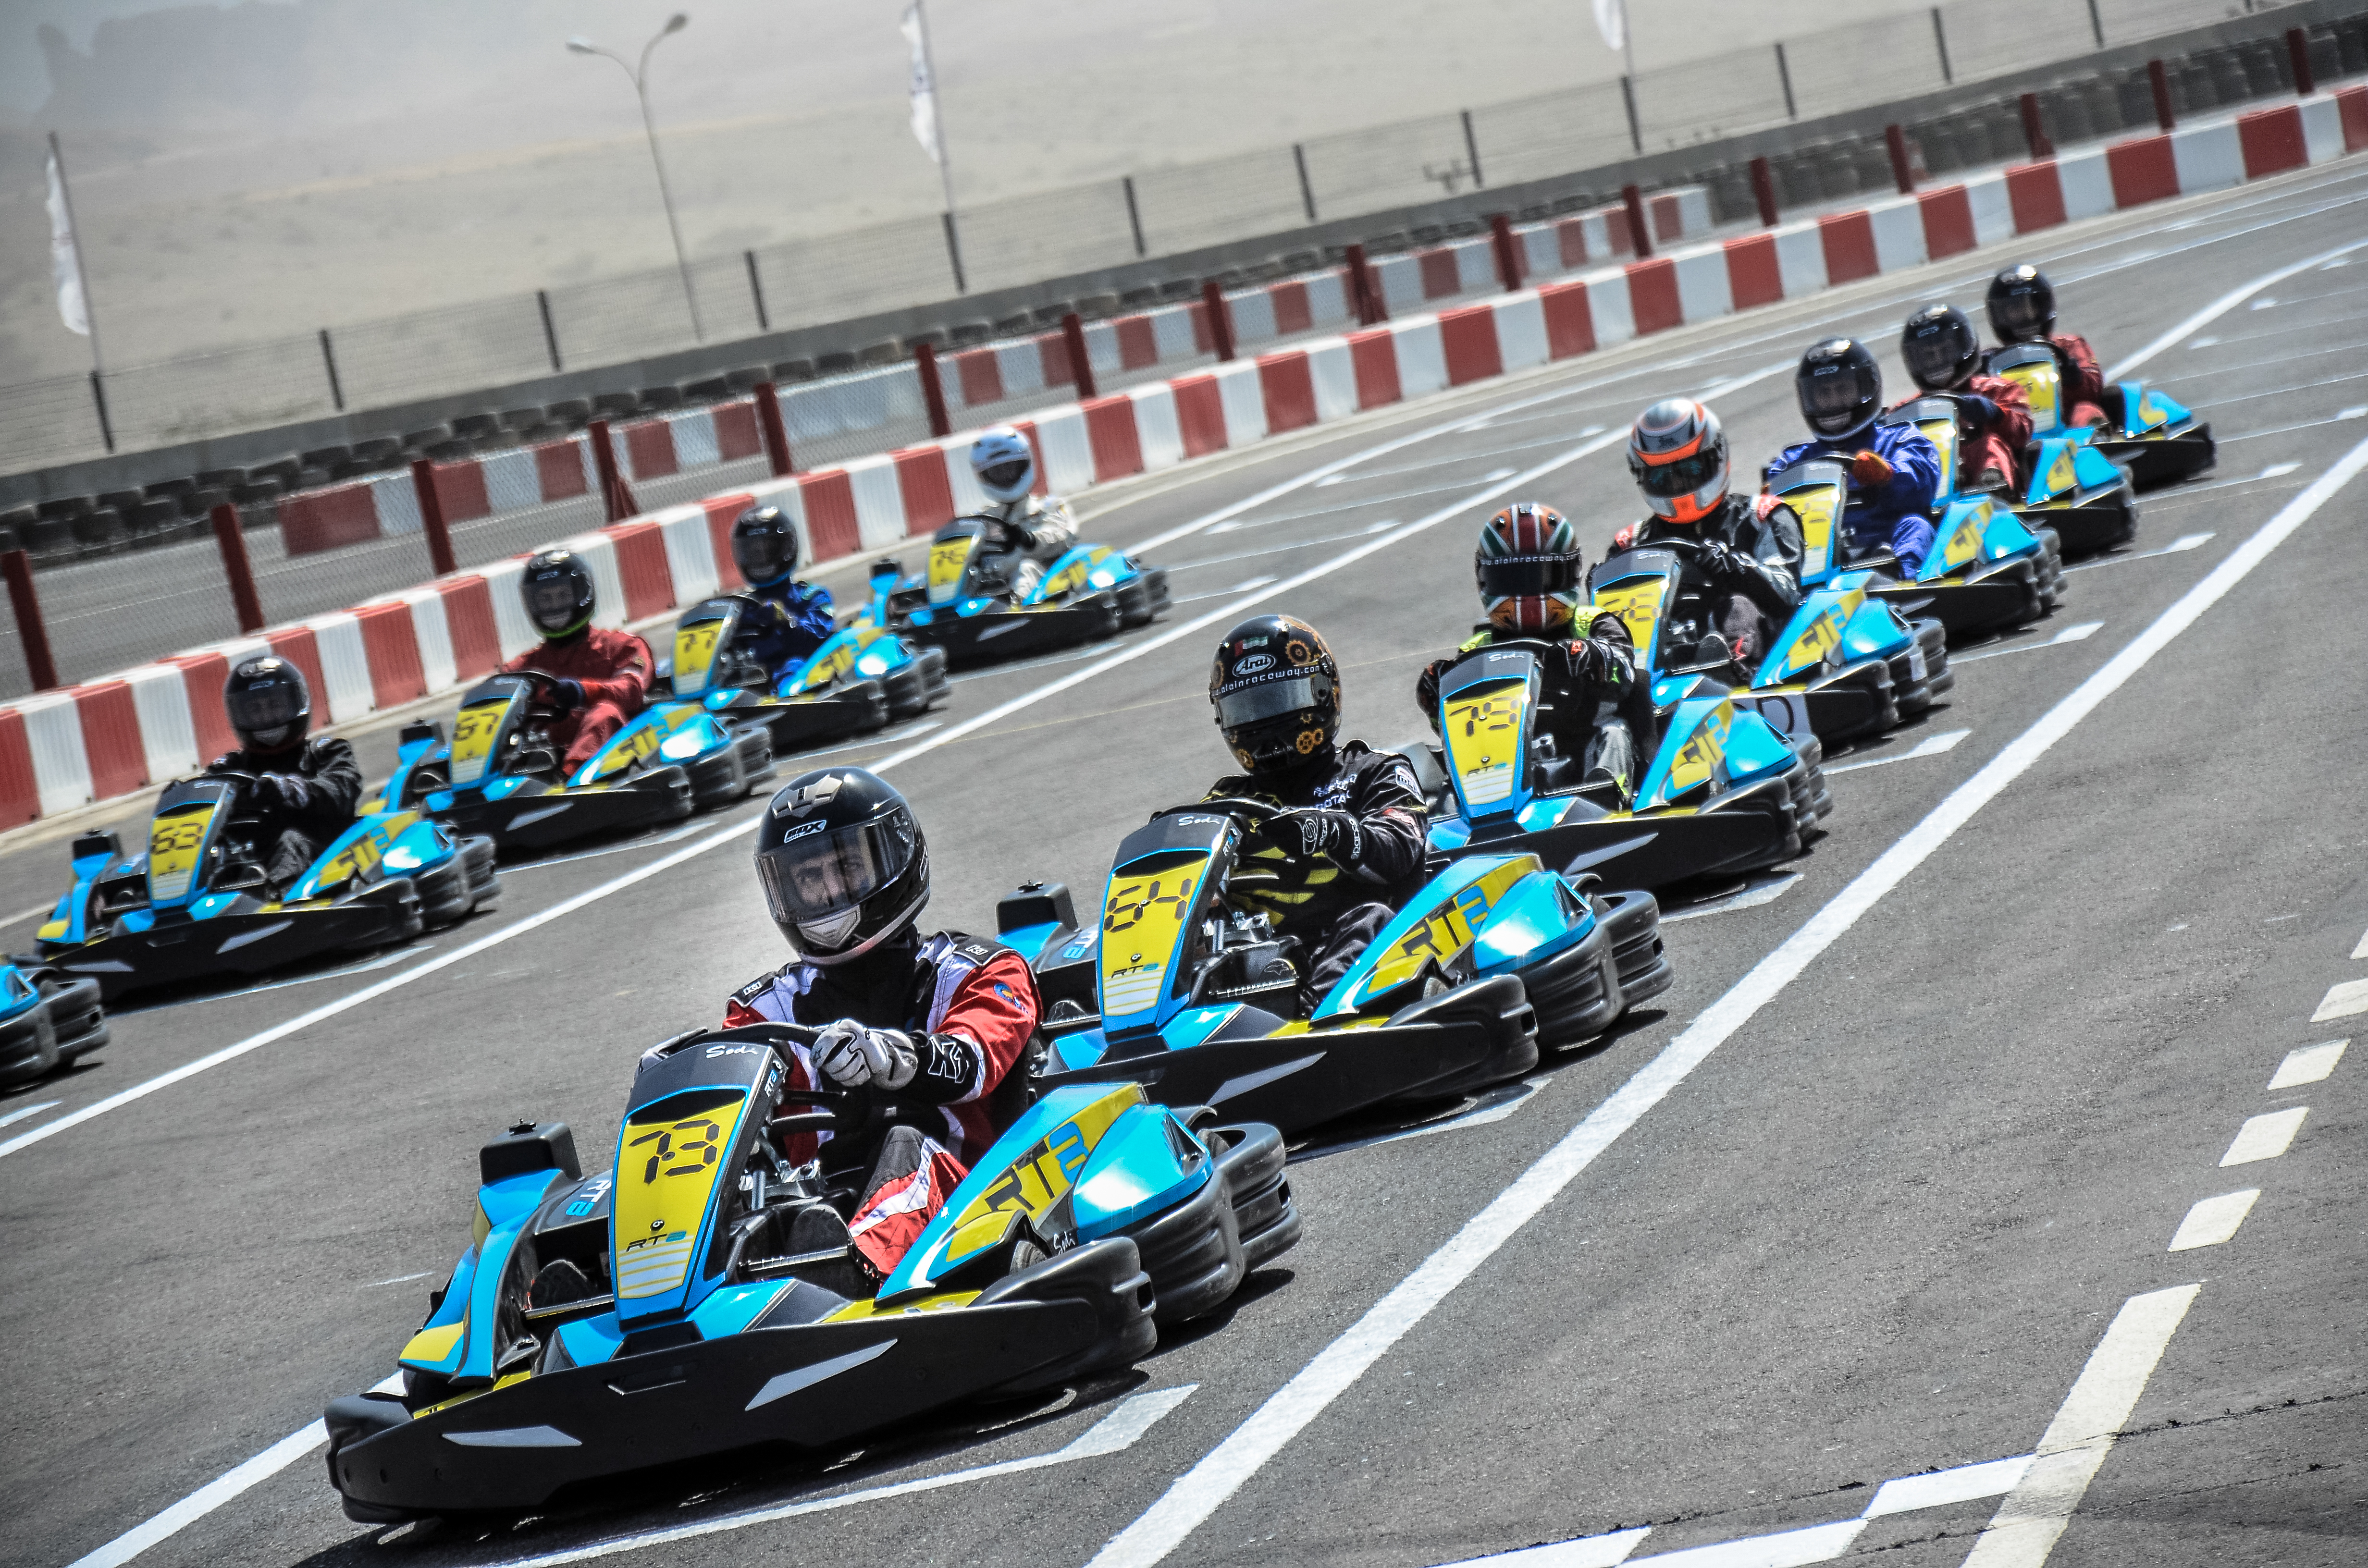 Try Karting in Muscat